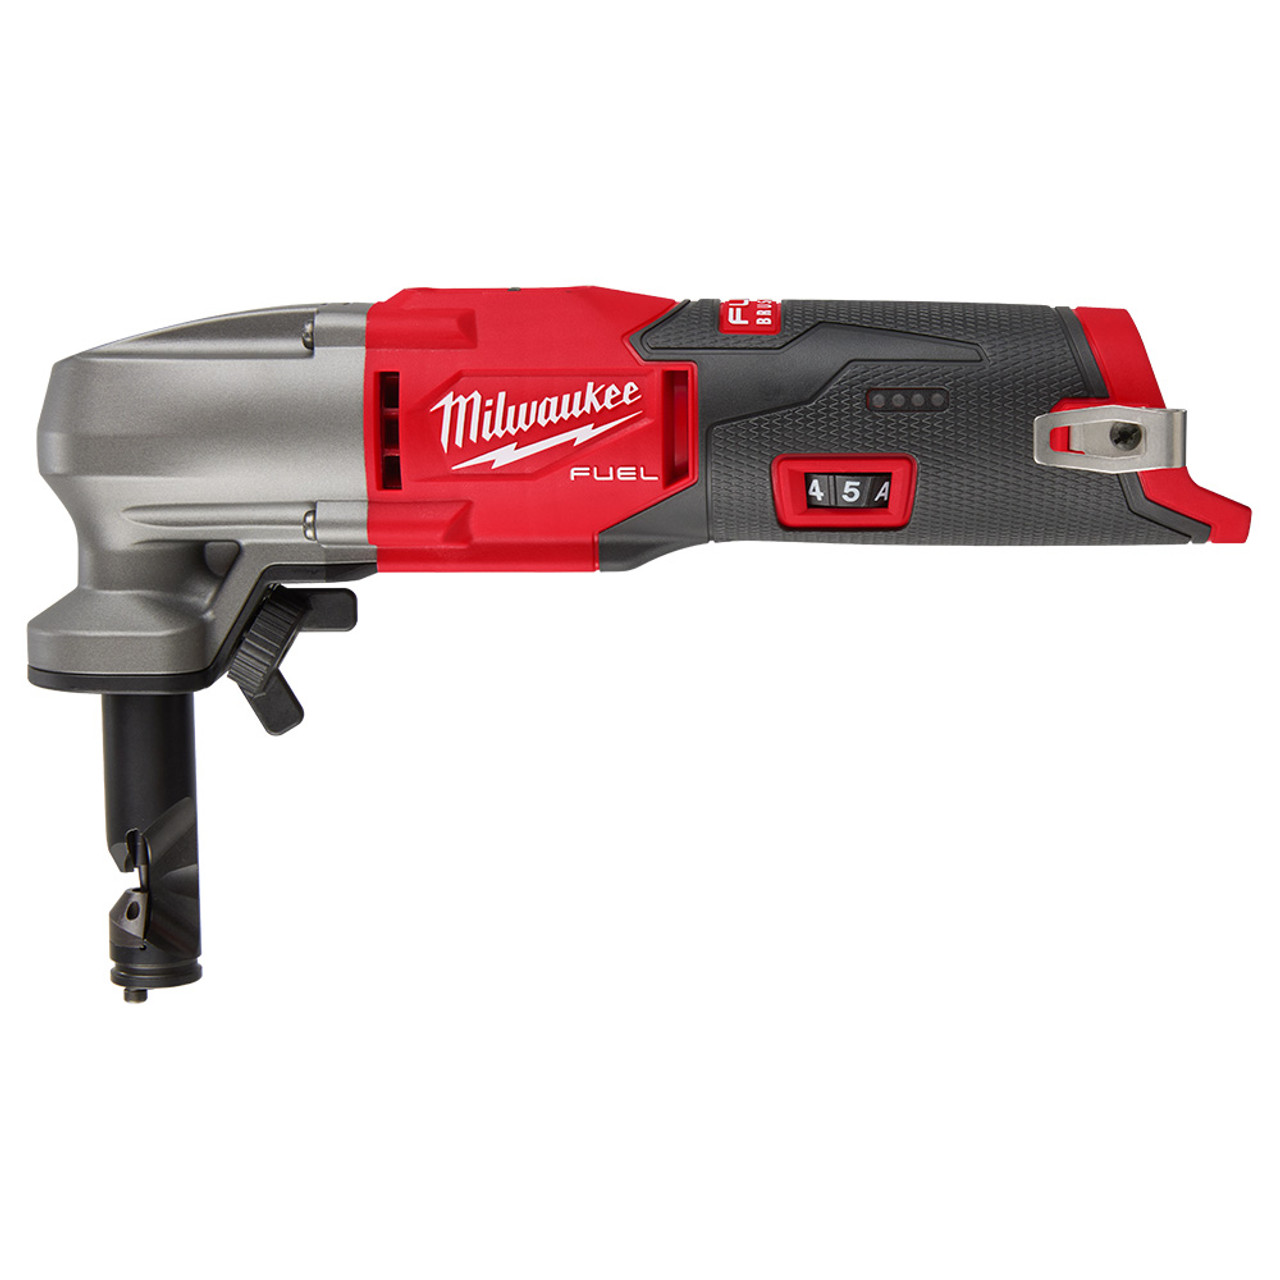 White Cap  Milwaukee 1/2 Variable Speed Kit Right Angle Drill